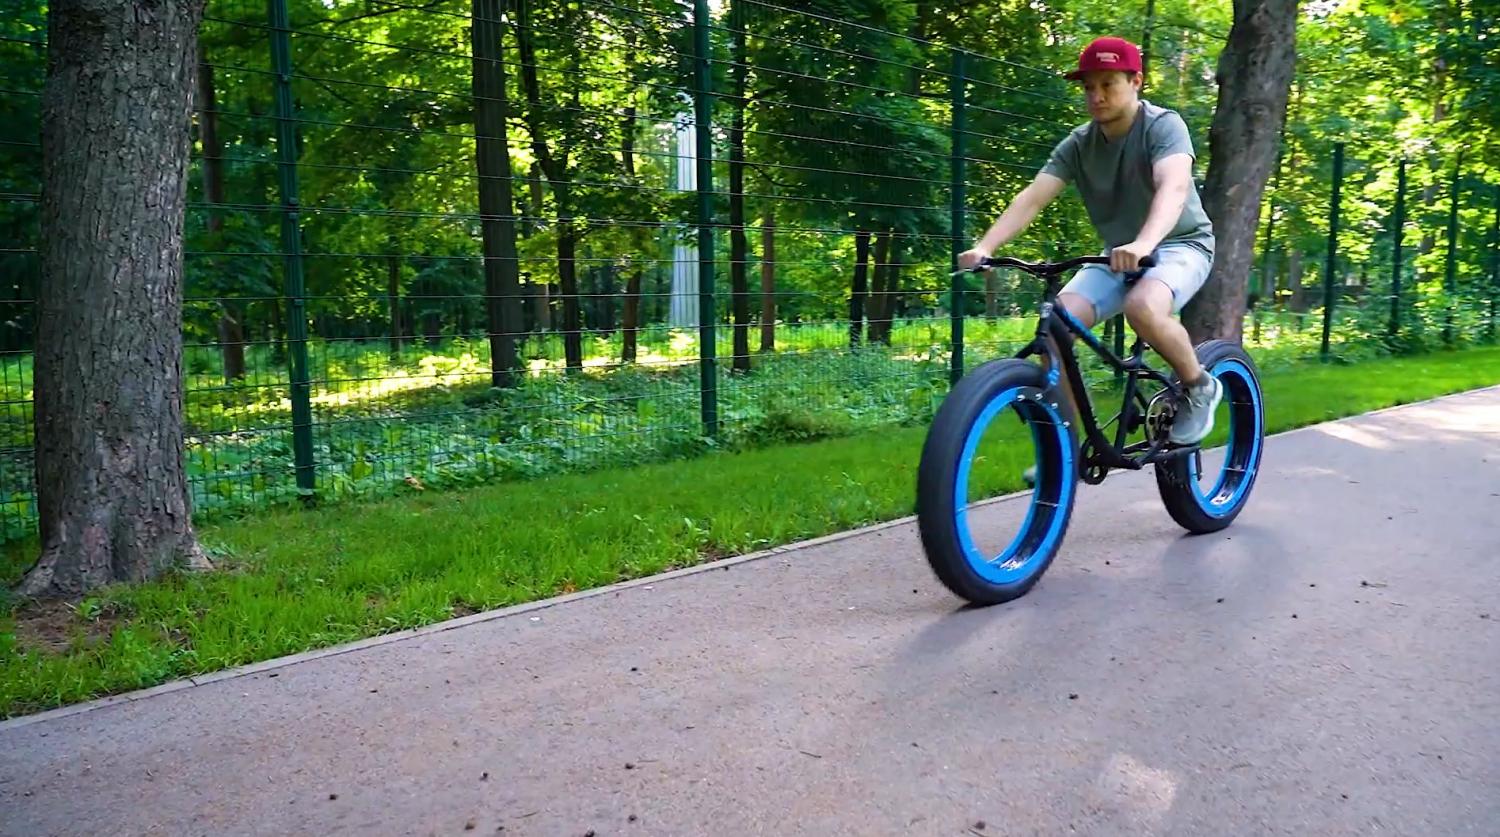 DIY Hubless Fat Tire Bicycle With Centreless wheel